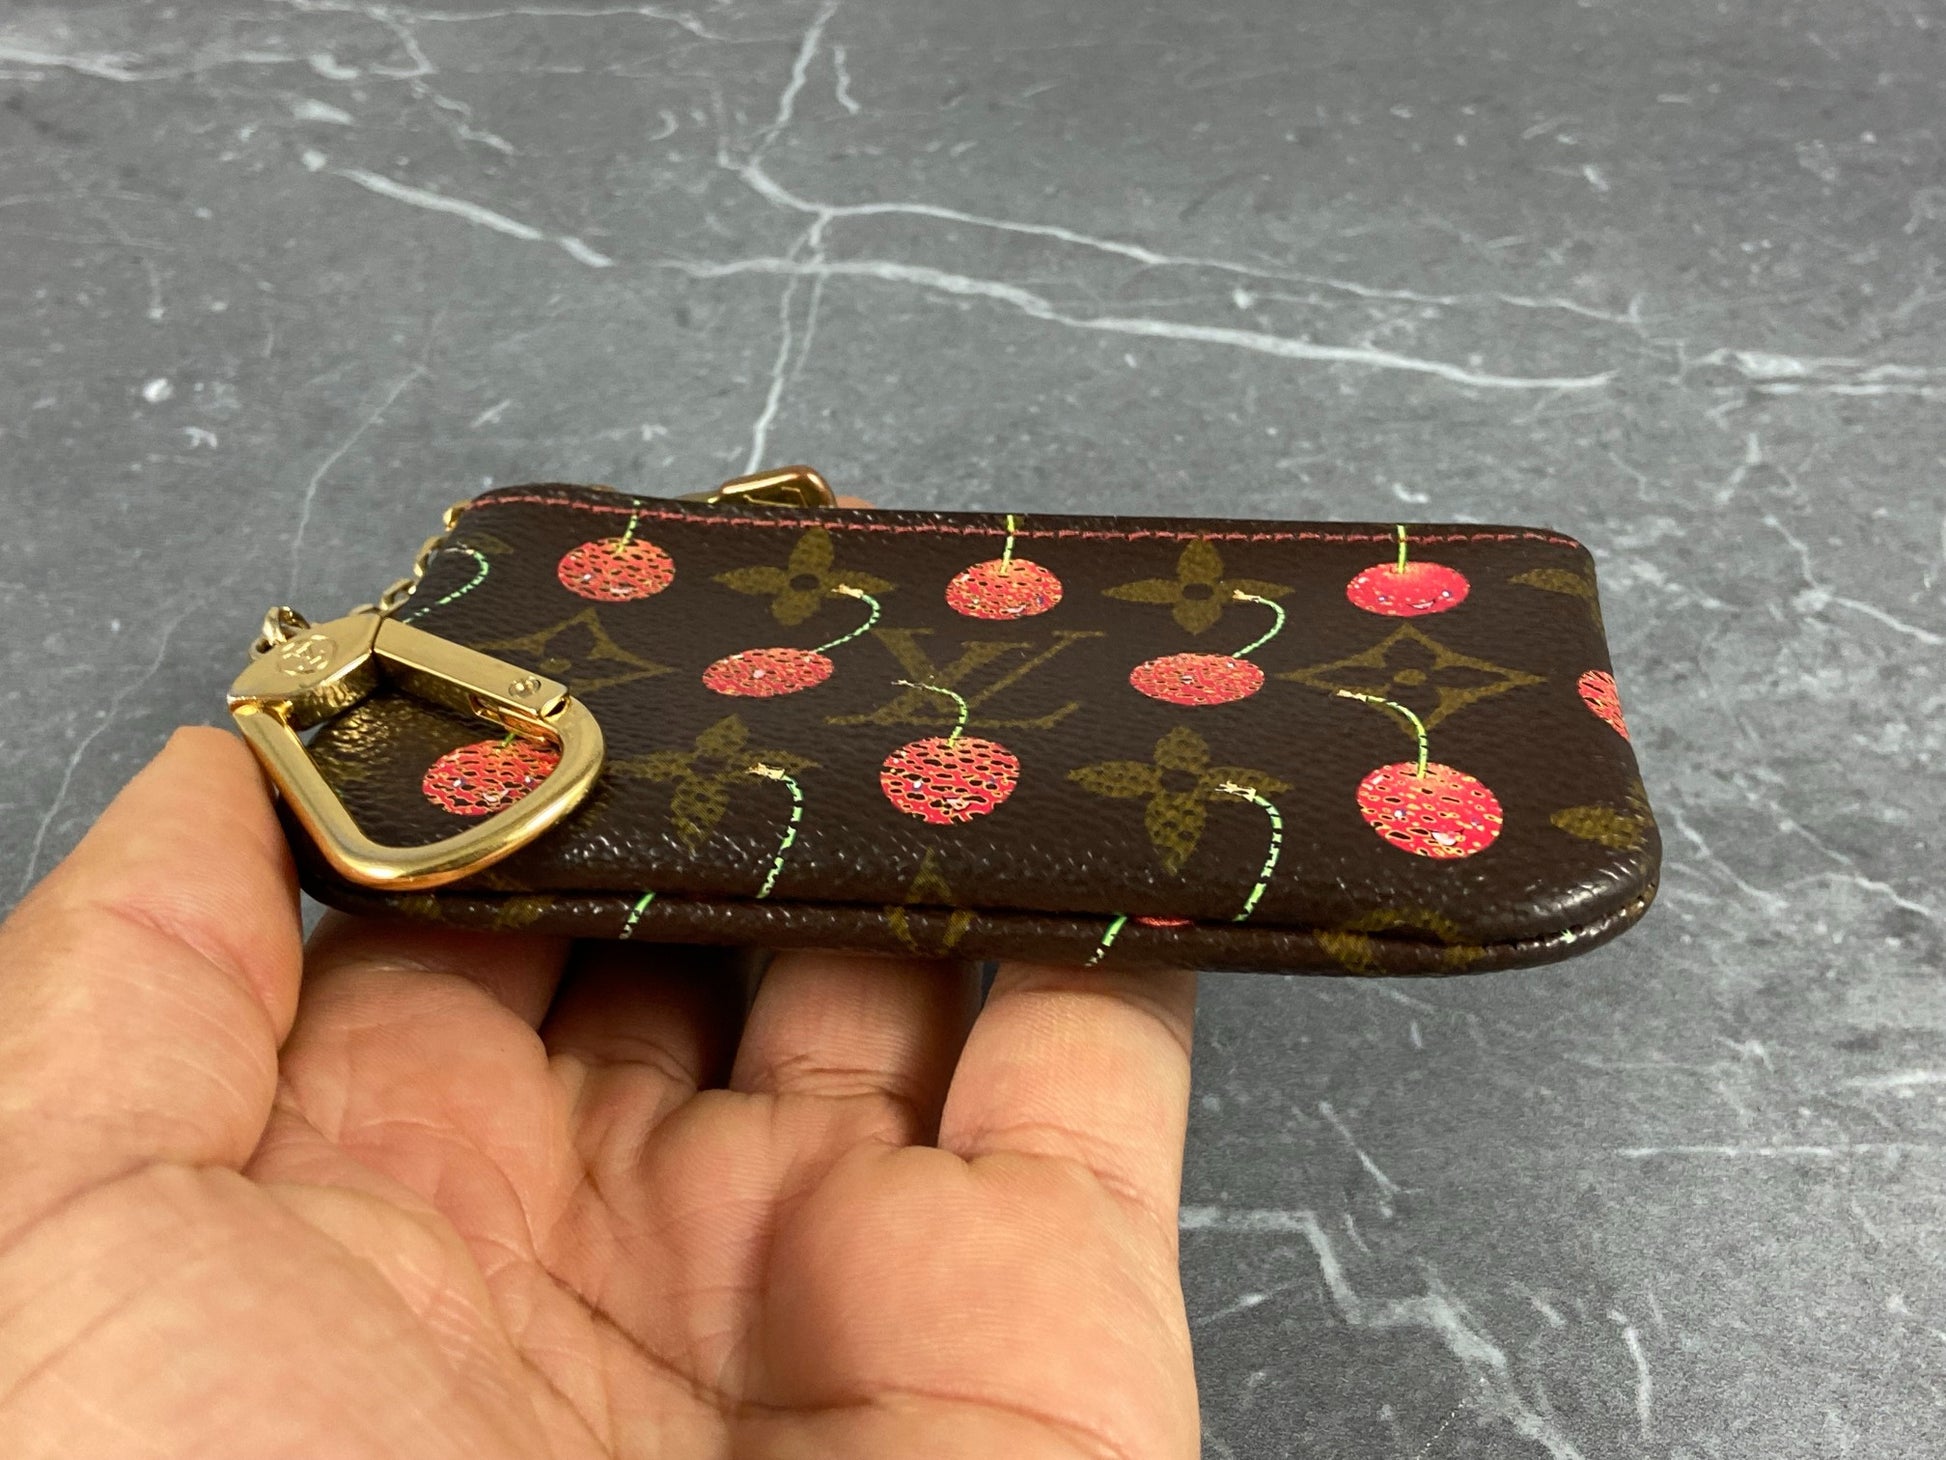 Louis Vuitton Key Pouch Cerises Cherry Monogram Brown/Red in